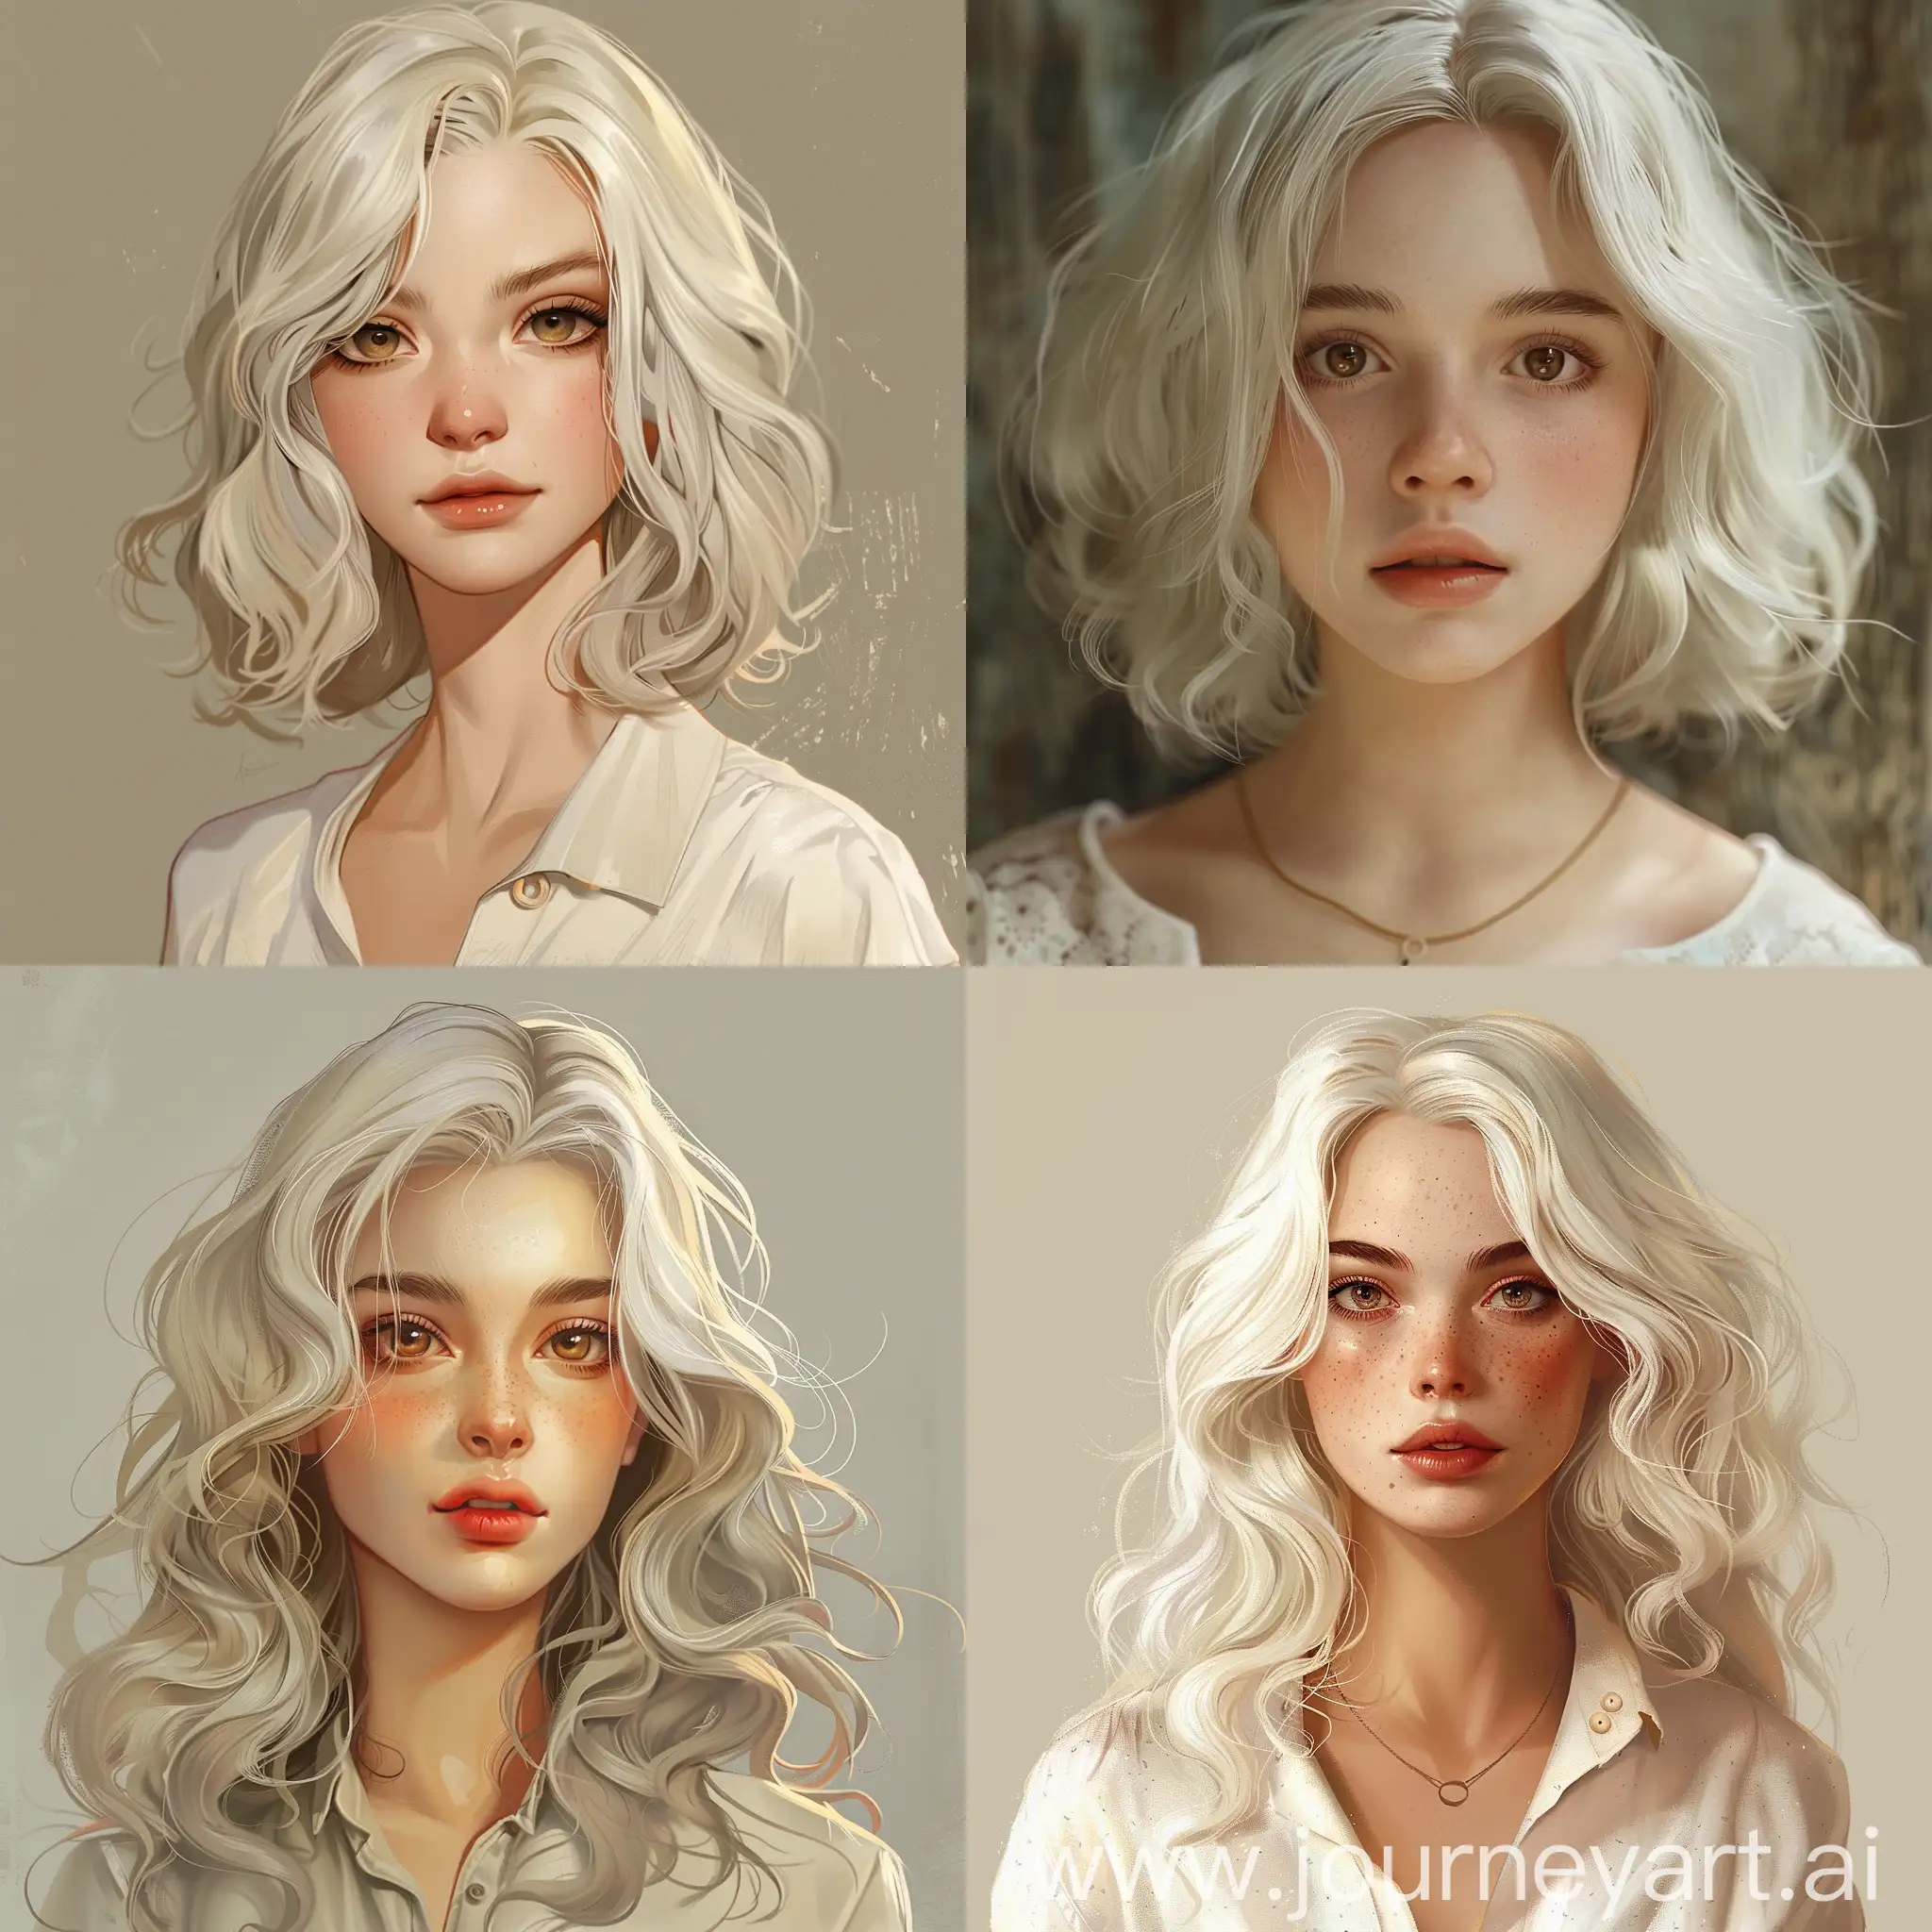 young adult woman, ivory colored wavy hair, pale skin, brown eyes, western stylized artstyle